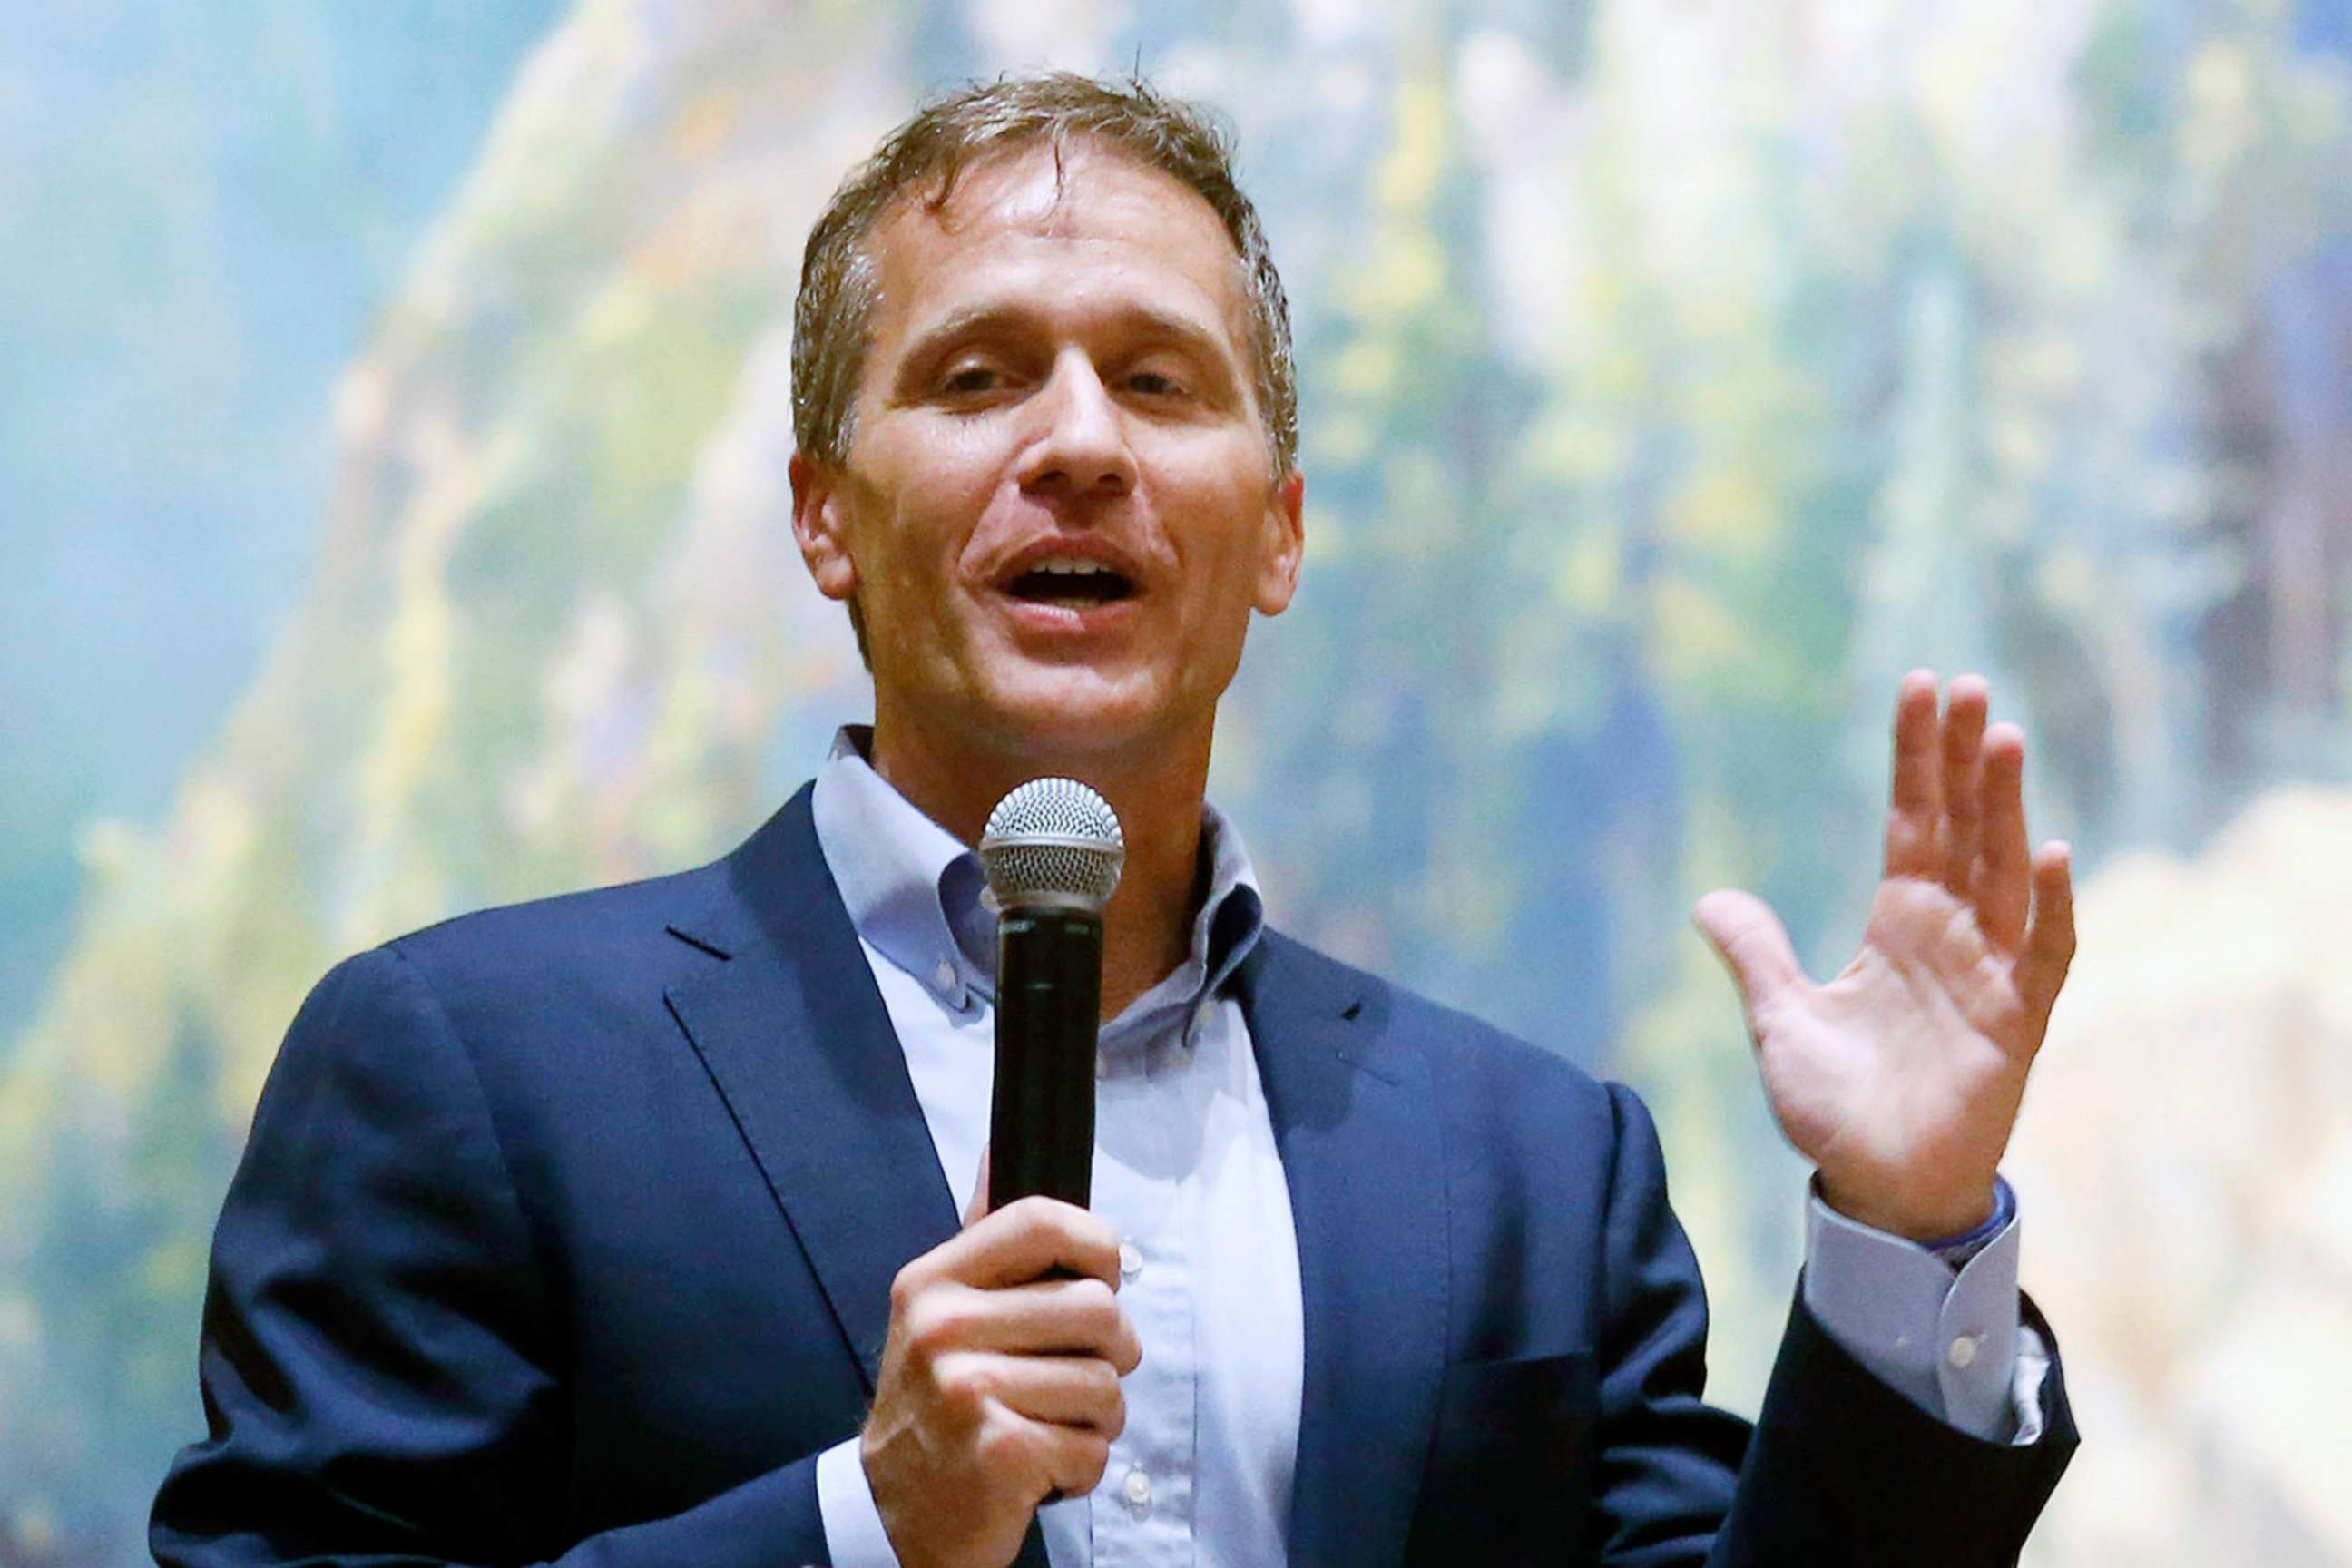 PHOTO: Gov. Eric Greitens speaks at the Taney County Lincoln Day event at the Chateau on the Lake in Branson, Mo., April 17, 2021.  